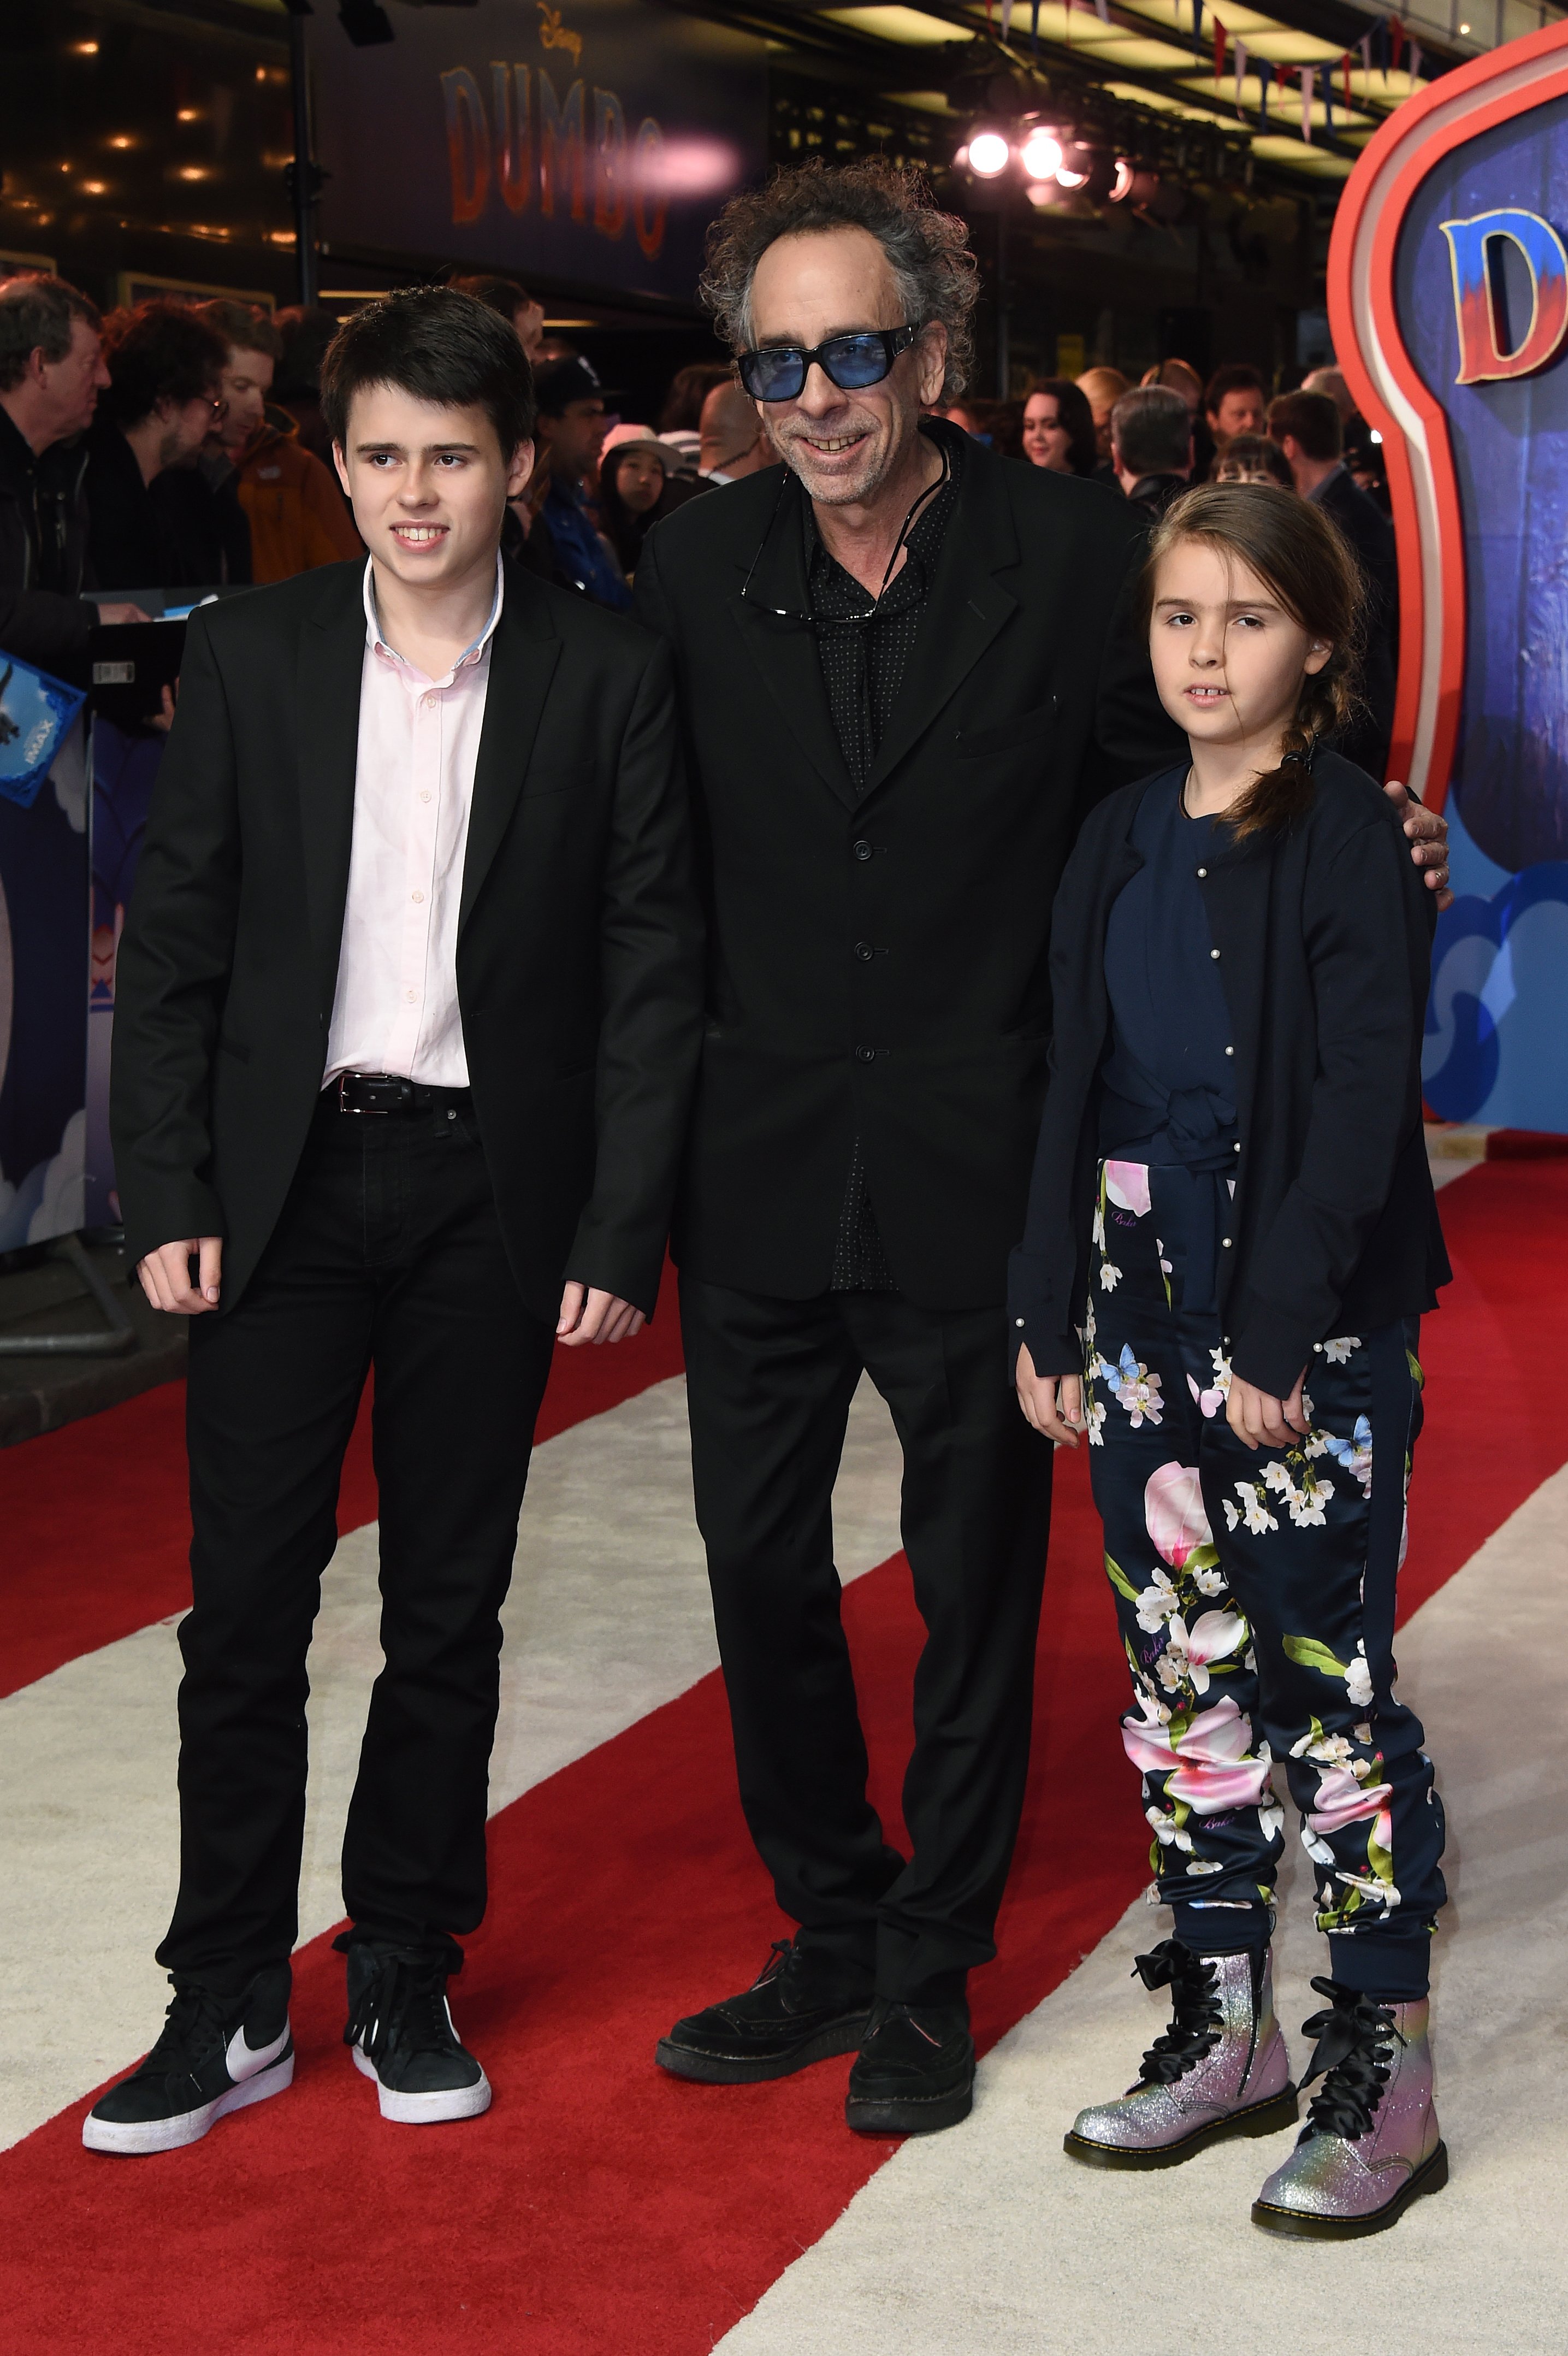 Tim Burton, Billy Ray Burton, and Nell Burton during the "Dumbo" European premiere at The Curzon Mayfair on March 21, 2019, in London, England. | Source: Getty Images